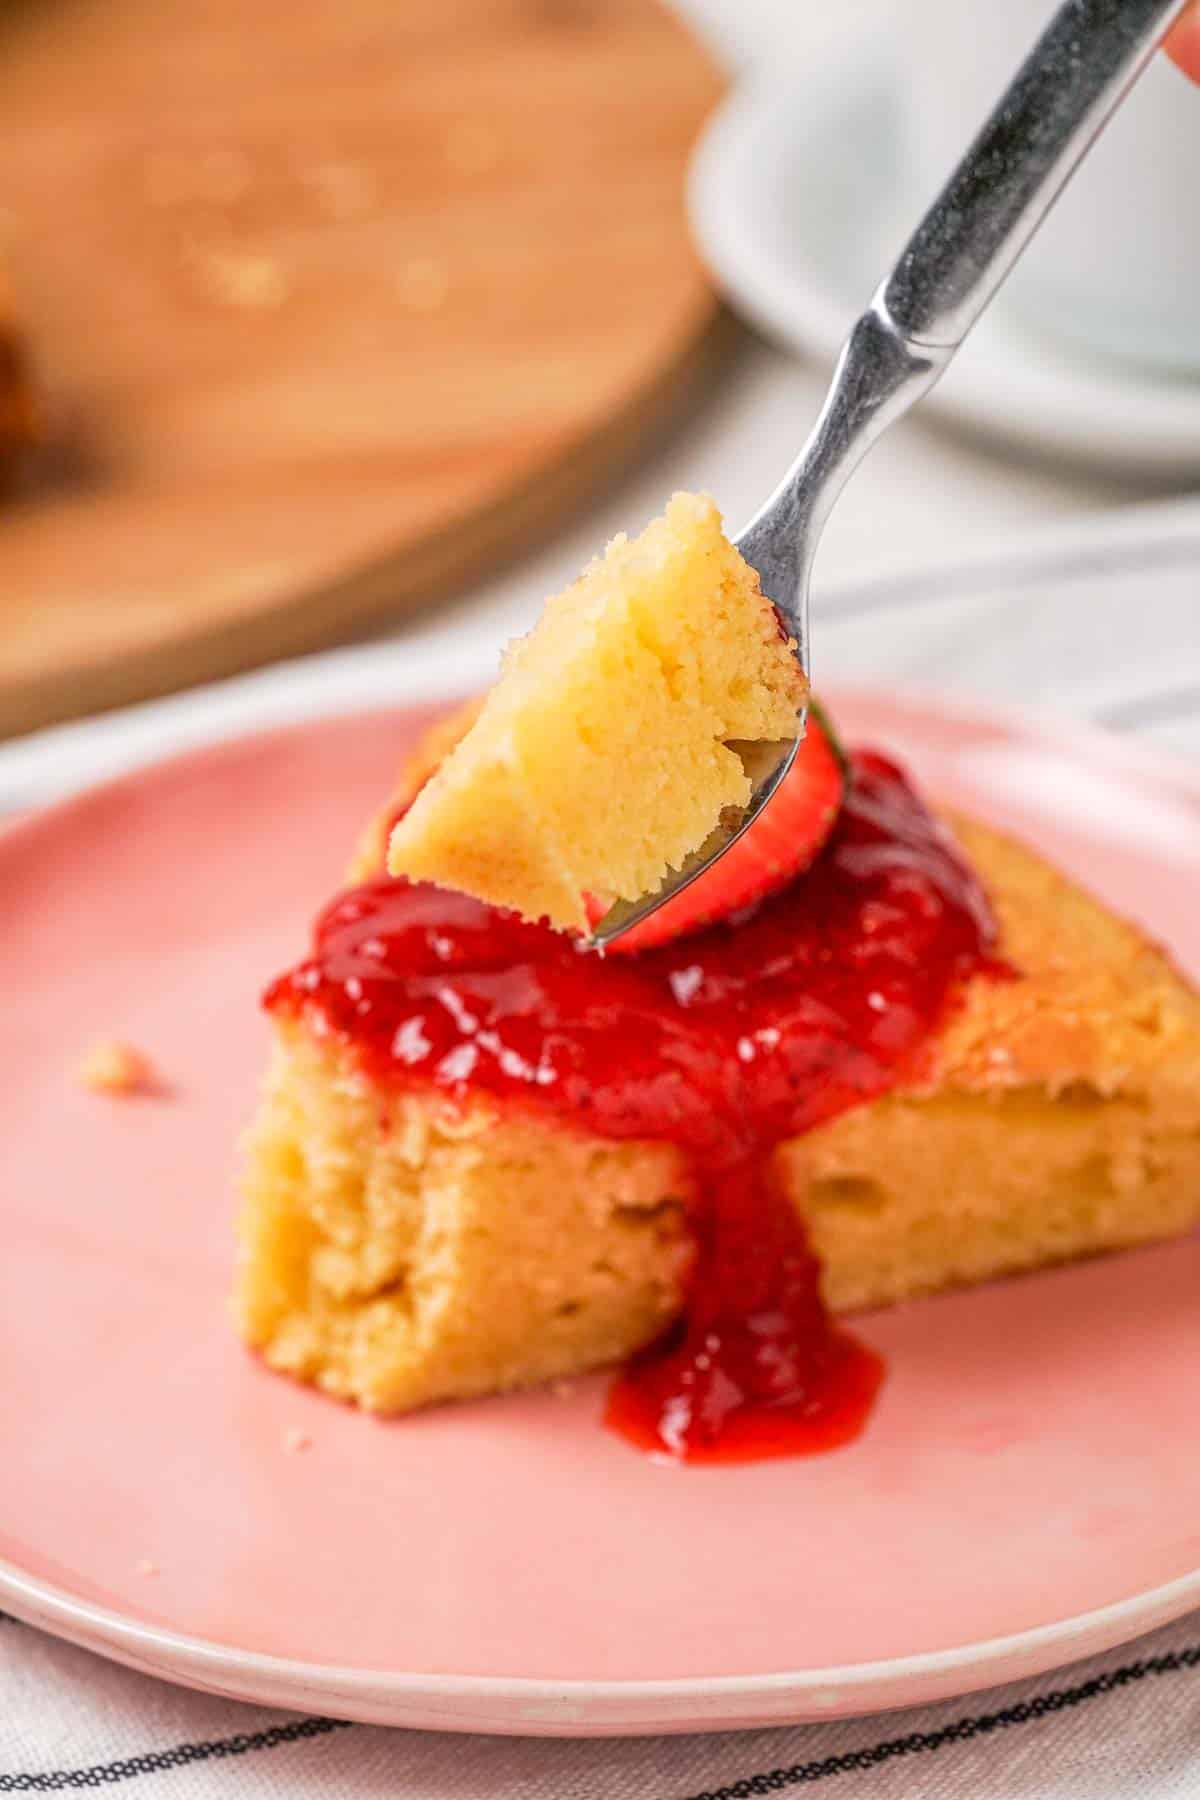 A forkful of cheesecake made from cottage cheese. The slice of cheesecake is visible in the background.